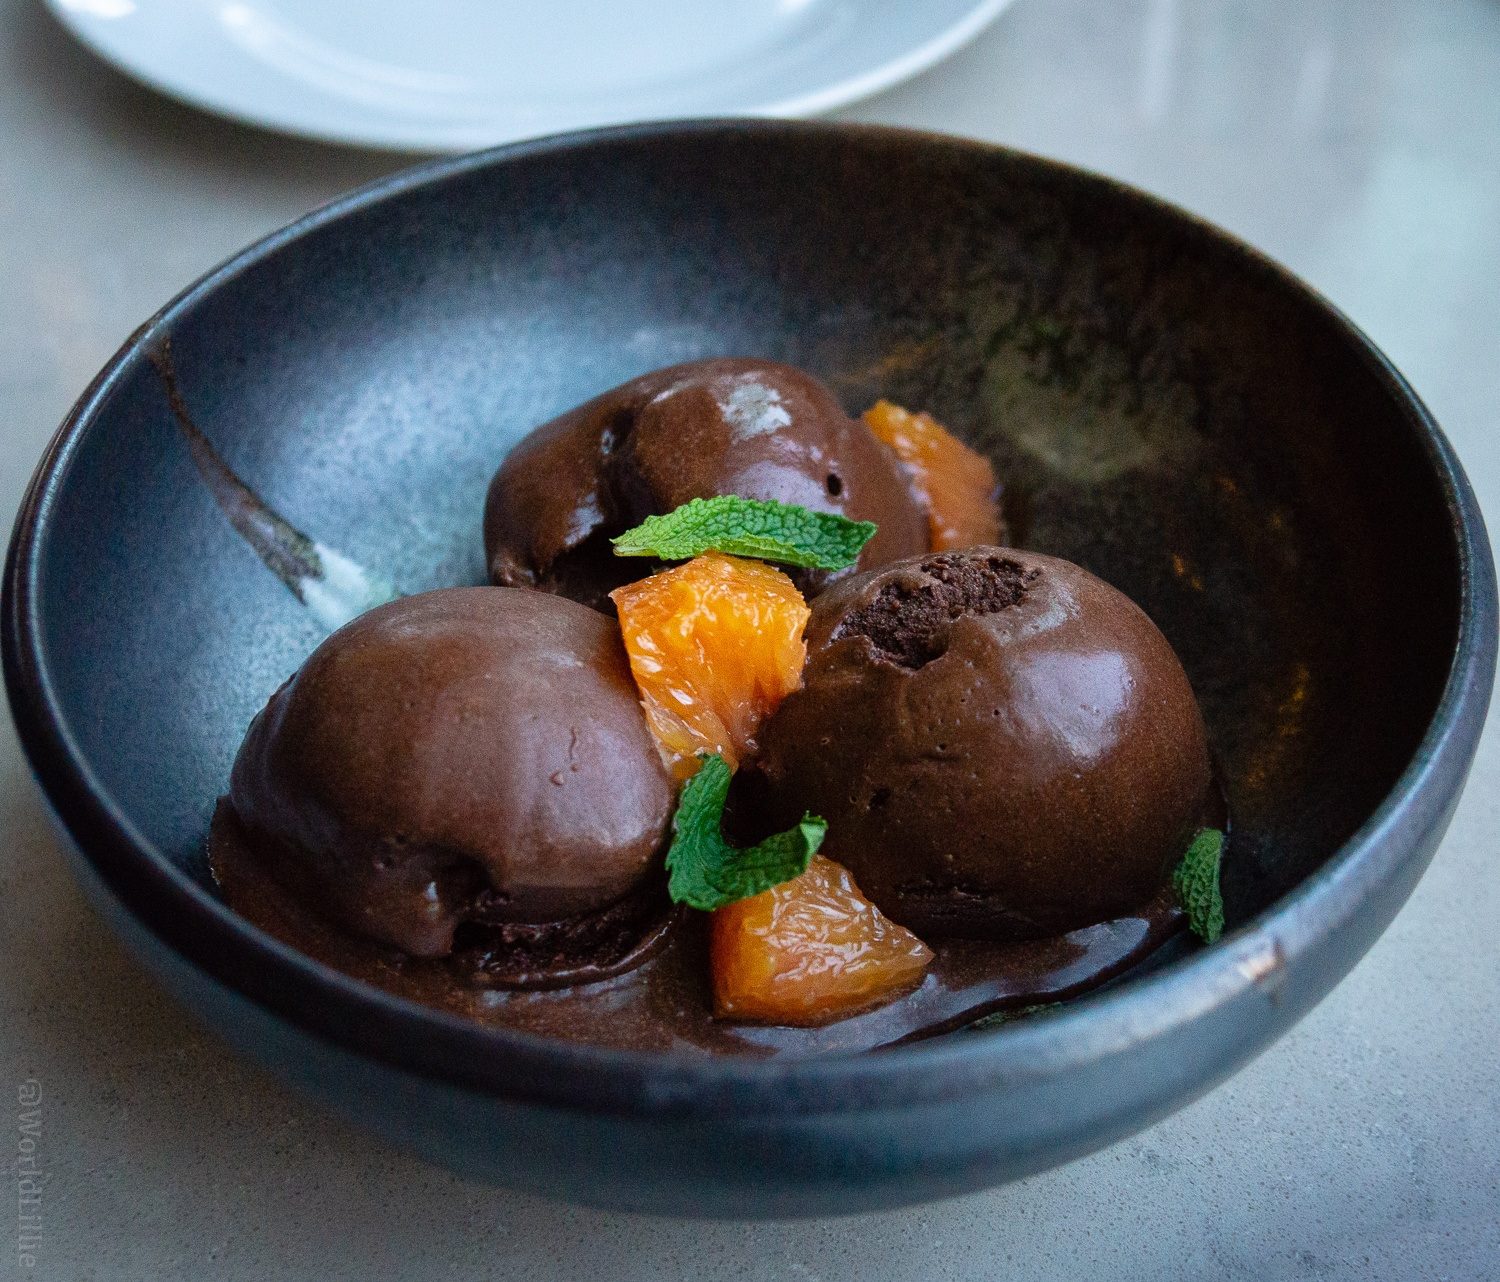 Chocolate Sorbet with Orange and Mint.